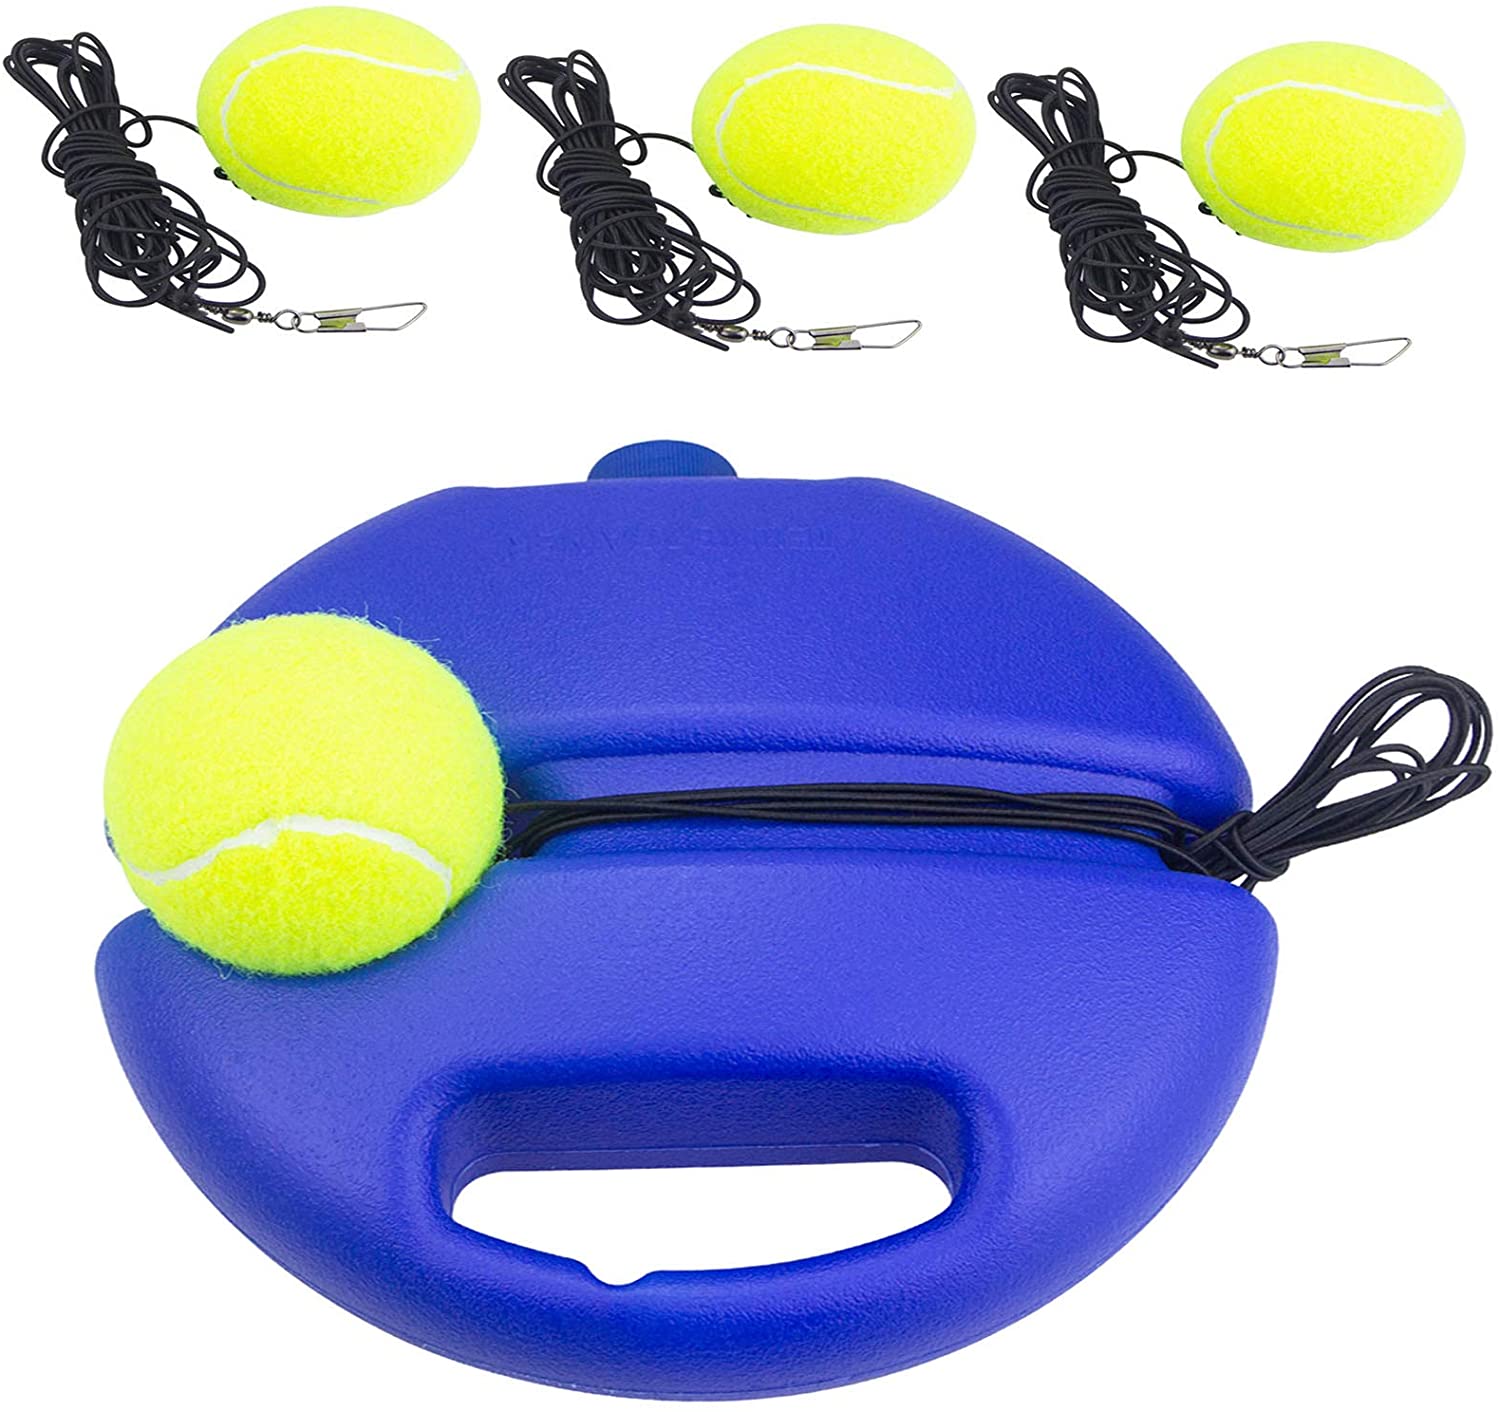 (🔥Last Day Promotion-SAVE 50% OFF) Solo Tennis Trainer---Buy 2 SETS GET 10% OFF